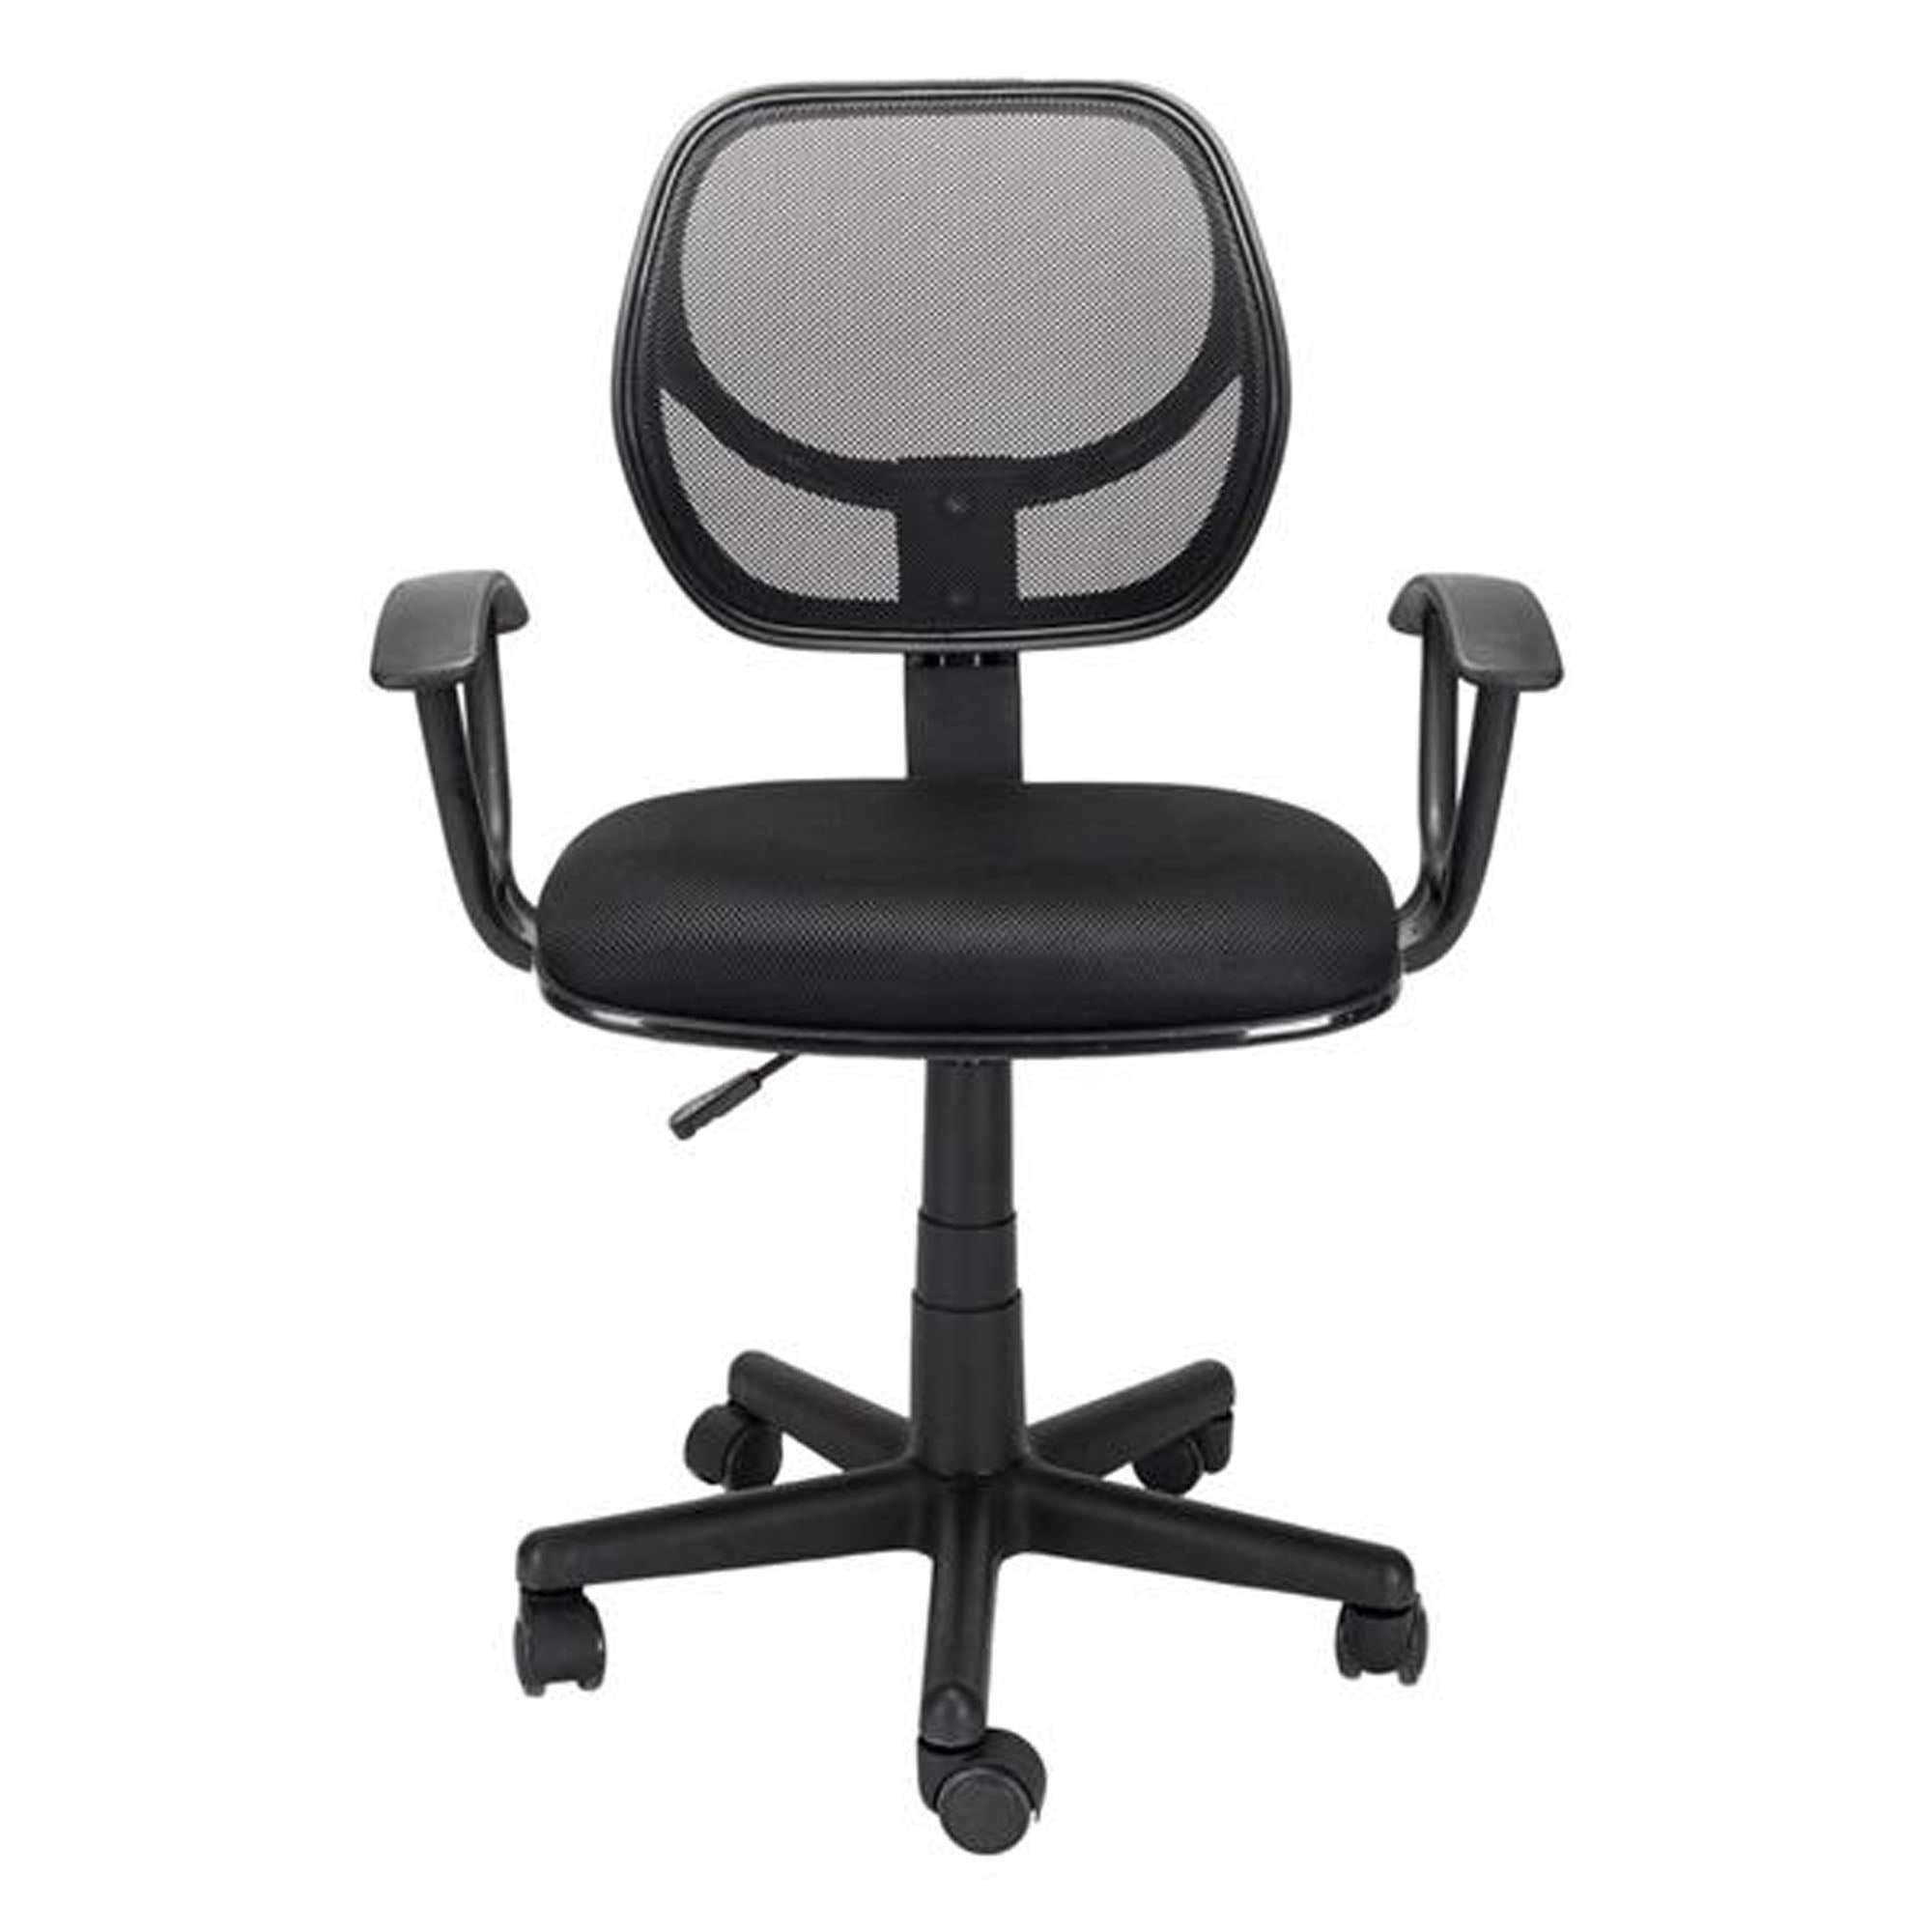 Black Office Chair Mesh Perspective Backrest Height Adjustable Computer